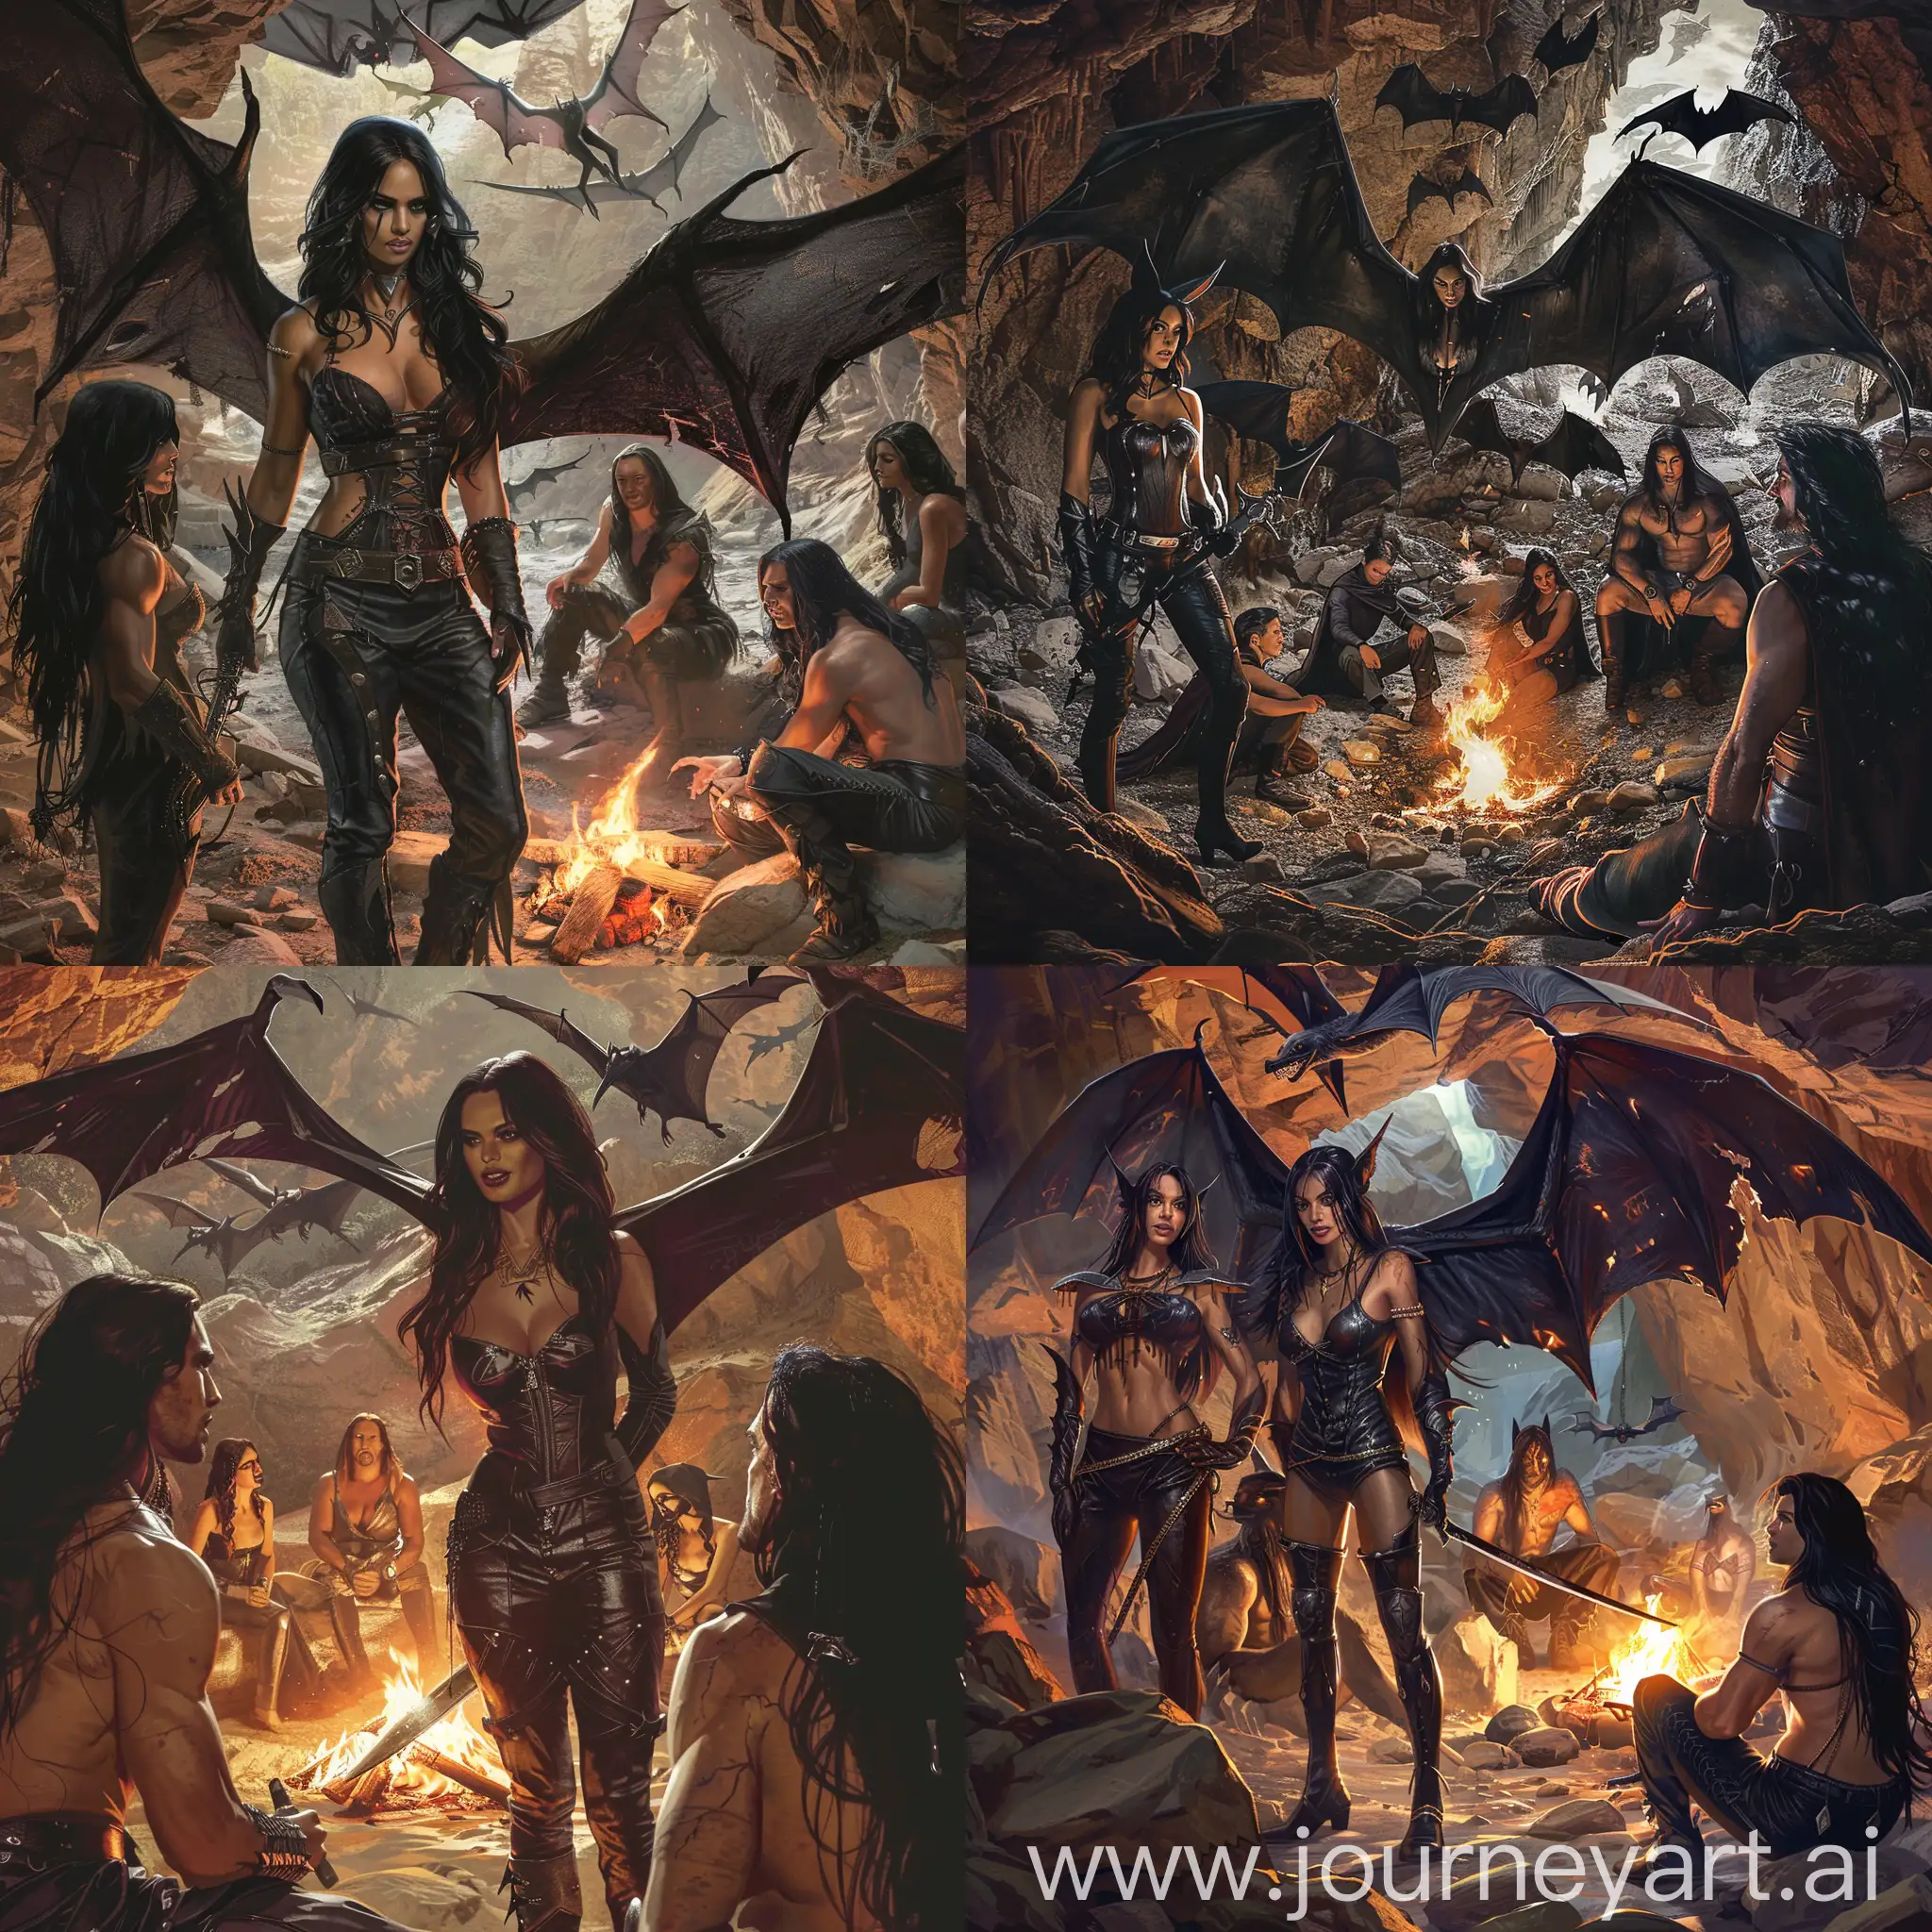 Bat winged beautiful lady with Latino features, dressed in leather, in a cave,  similar bat winged people sitting and standing around a fire in the cave, a Caucasian man with long black hair standing in front of her holding a dagger of solid light. 